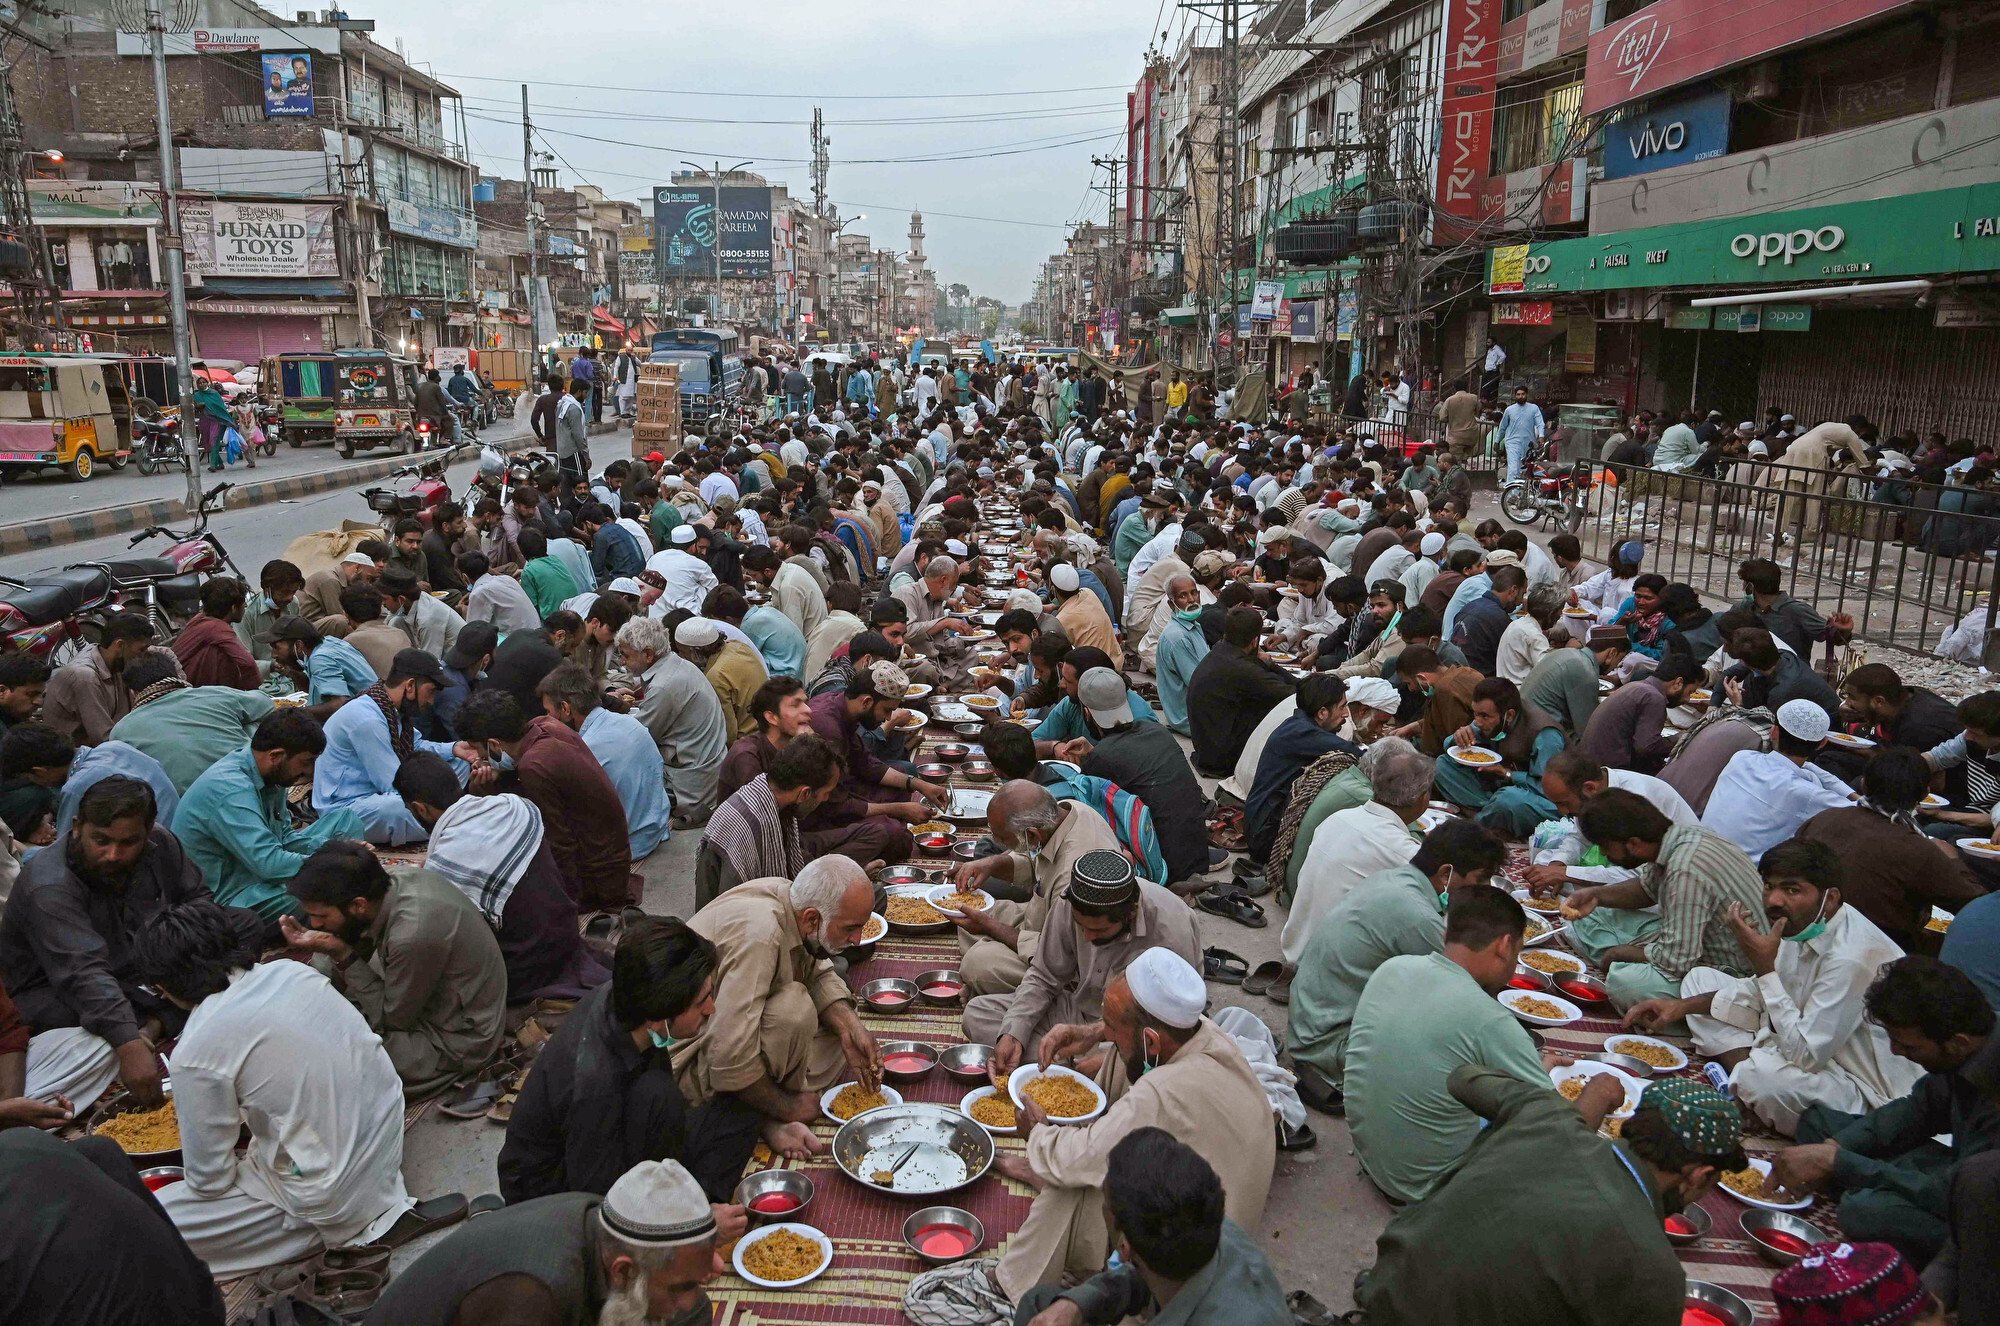 Muslim devotees break their Iftar fast along a road during the holy month of Ramadan in Rawalpindi on April 28. Pakistan has the world’s second-largest Muslim population. Photo: AFP